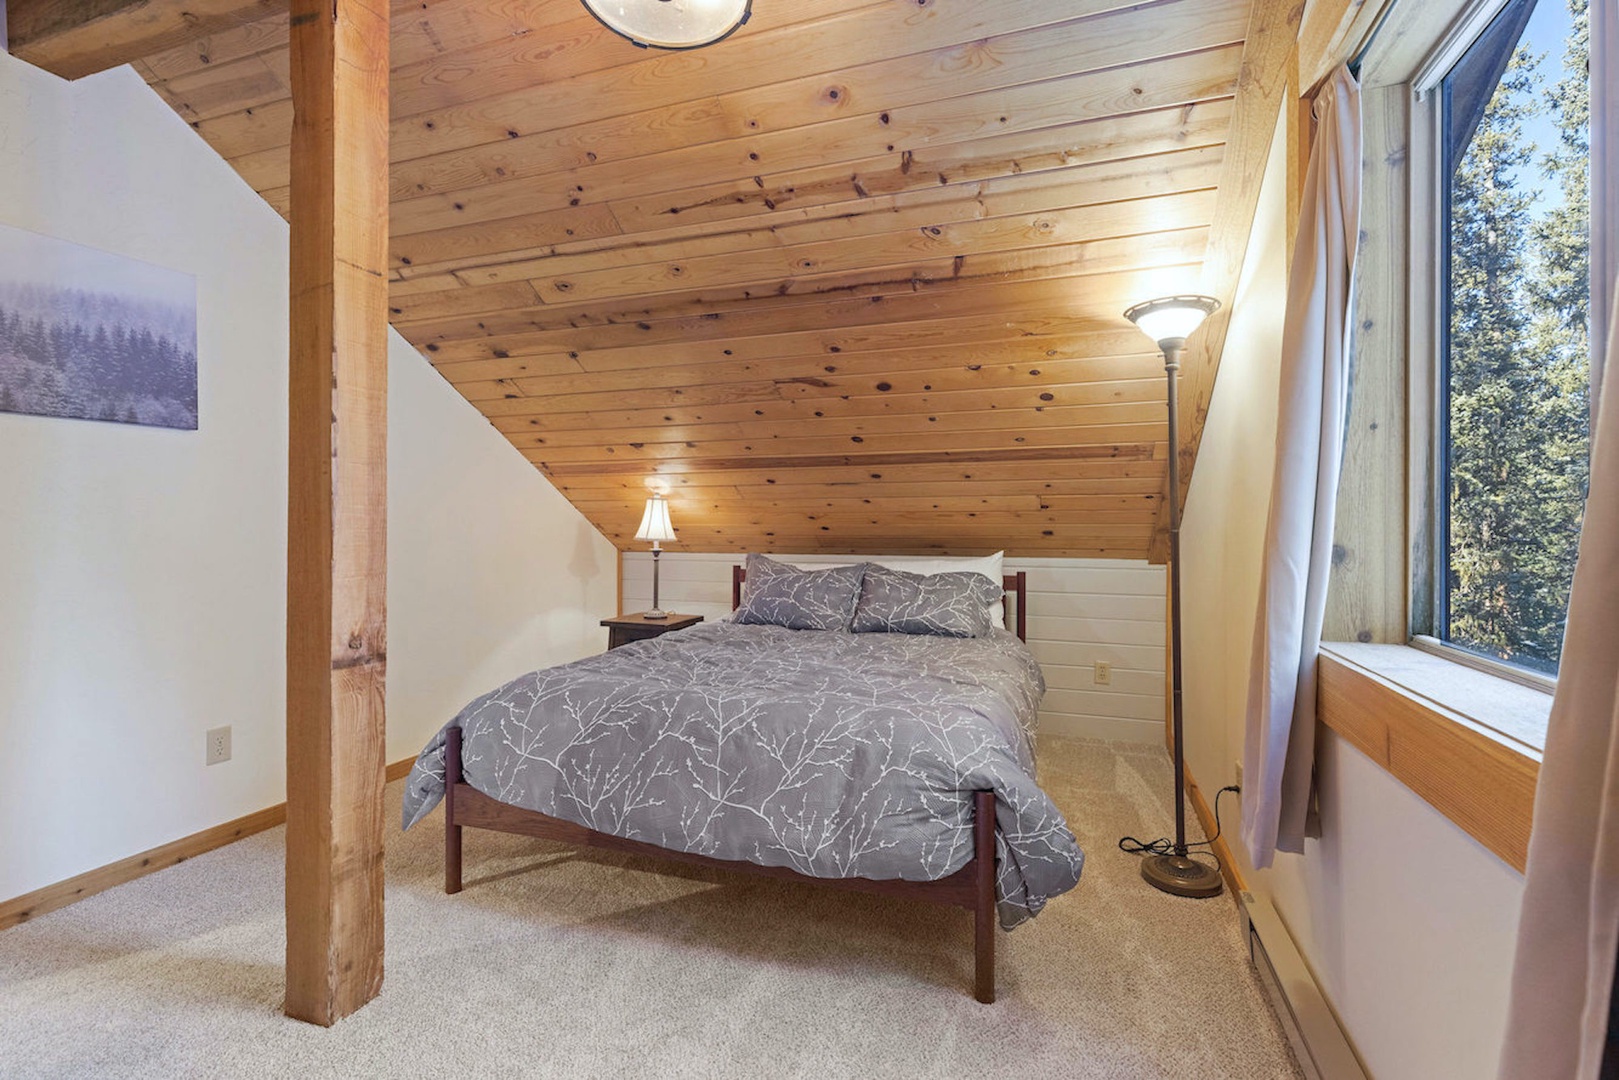 A plush queen bed & private ensuite await in this tranquil upper-level suite